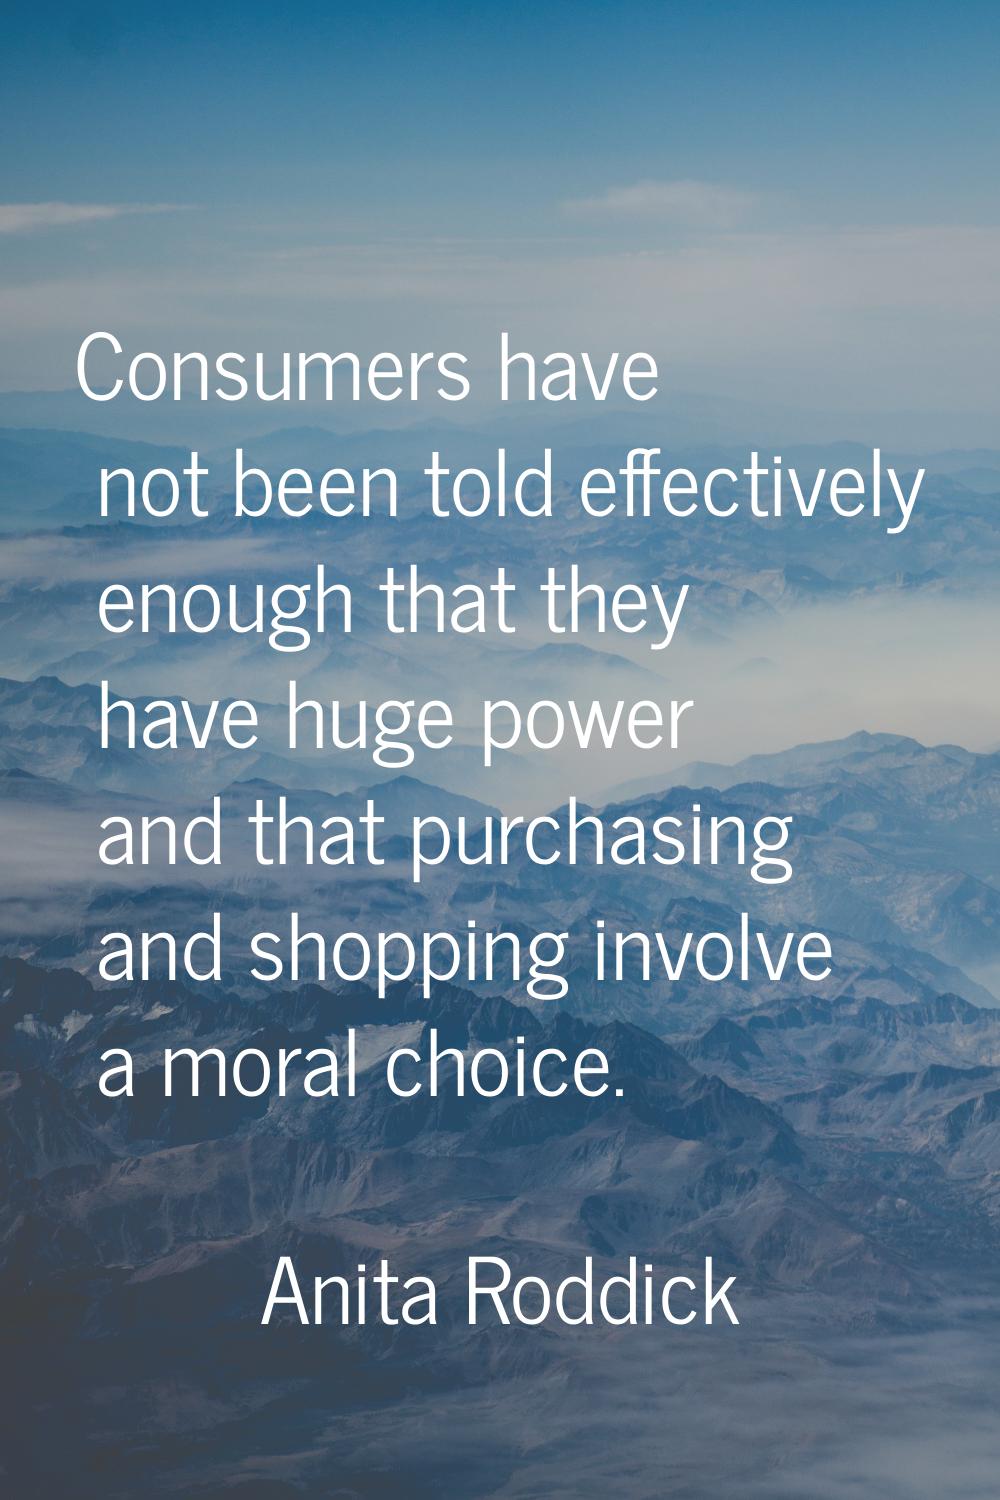 Consumers have not been told effectively enough that they have huge power and that purchasing and s